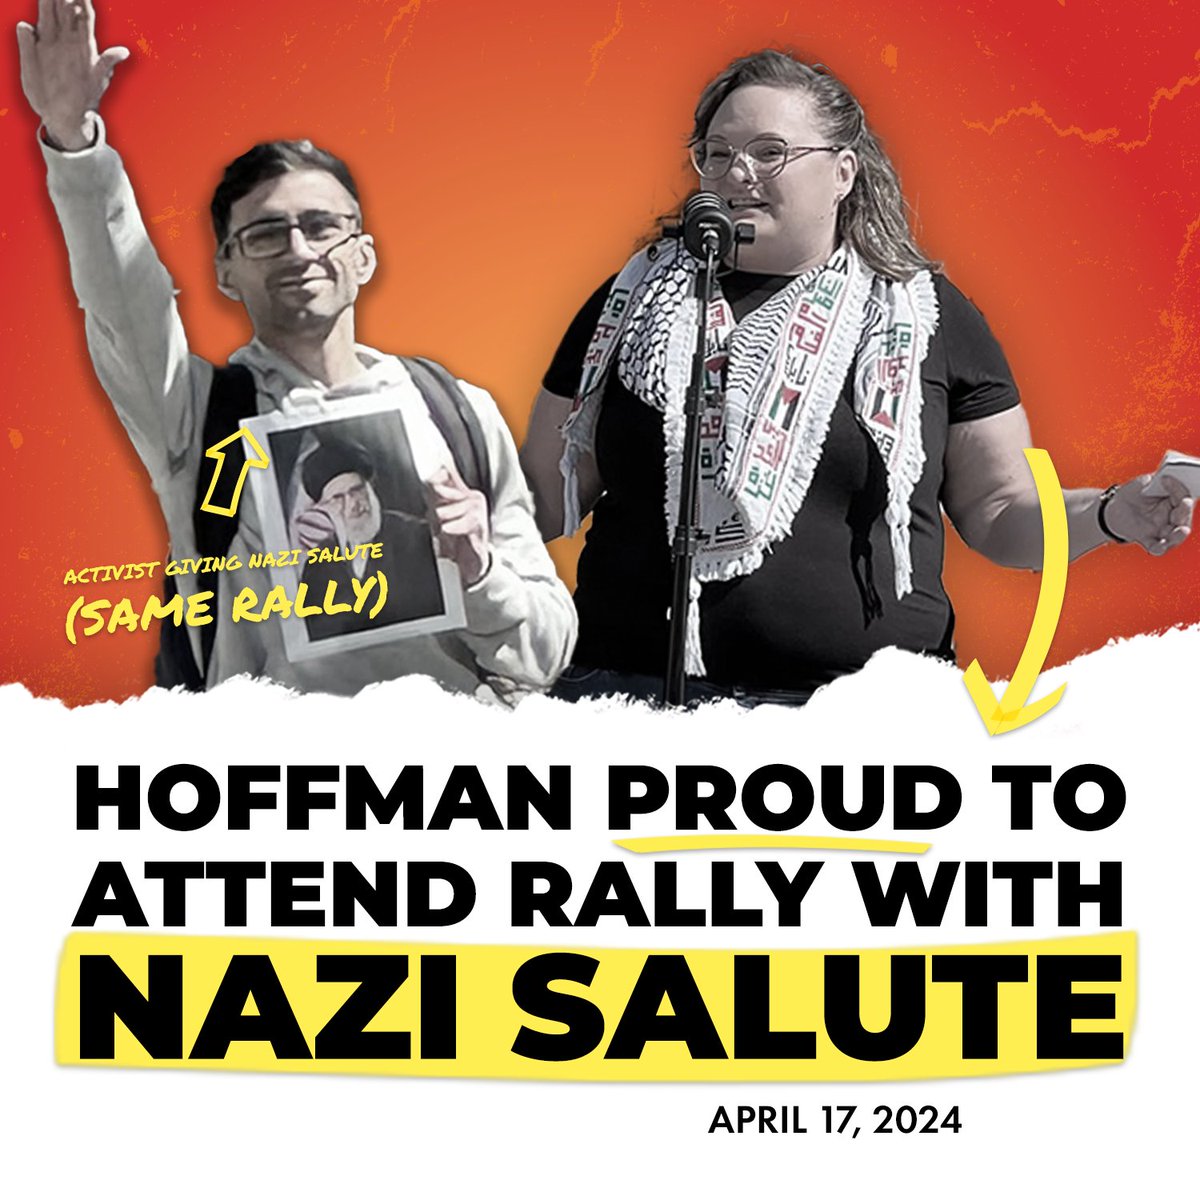 NDP MLA Sarah Hoffman is proud about attending a rally where people were giving Nazi salutes? As Jewish Albertans prepare to celebrate Passover, MLA Hoffman should do the right thing and apologize for her participation in this hateful event. #ableg #abpoli